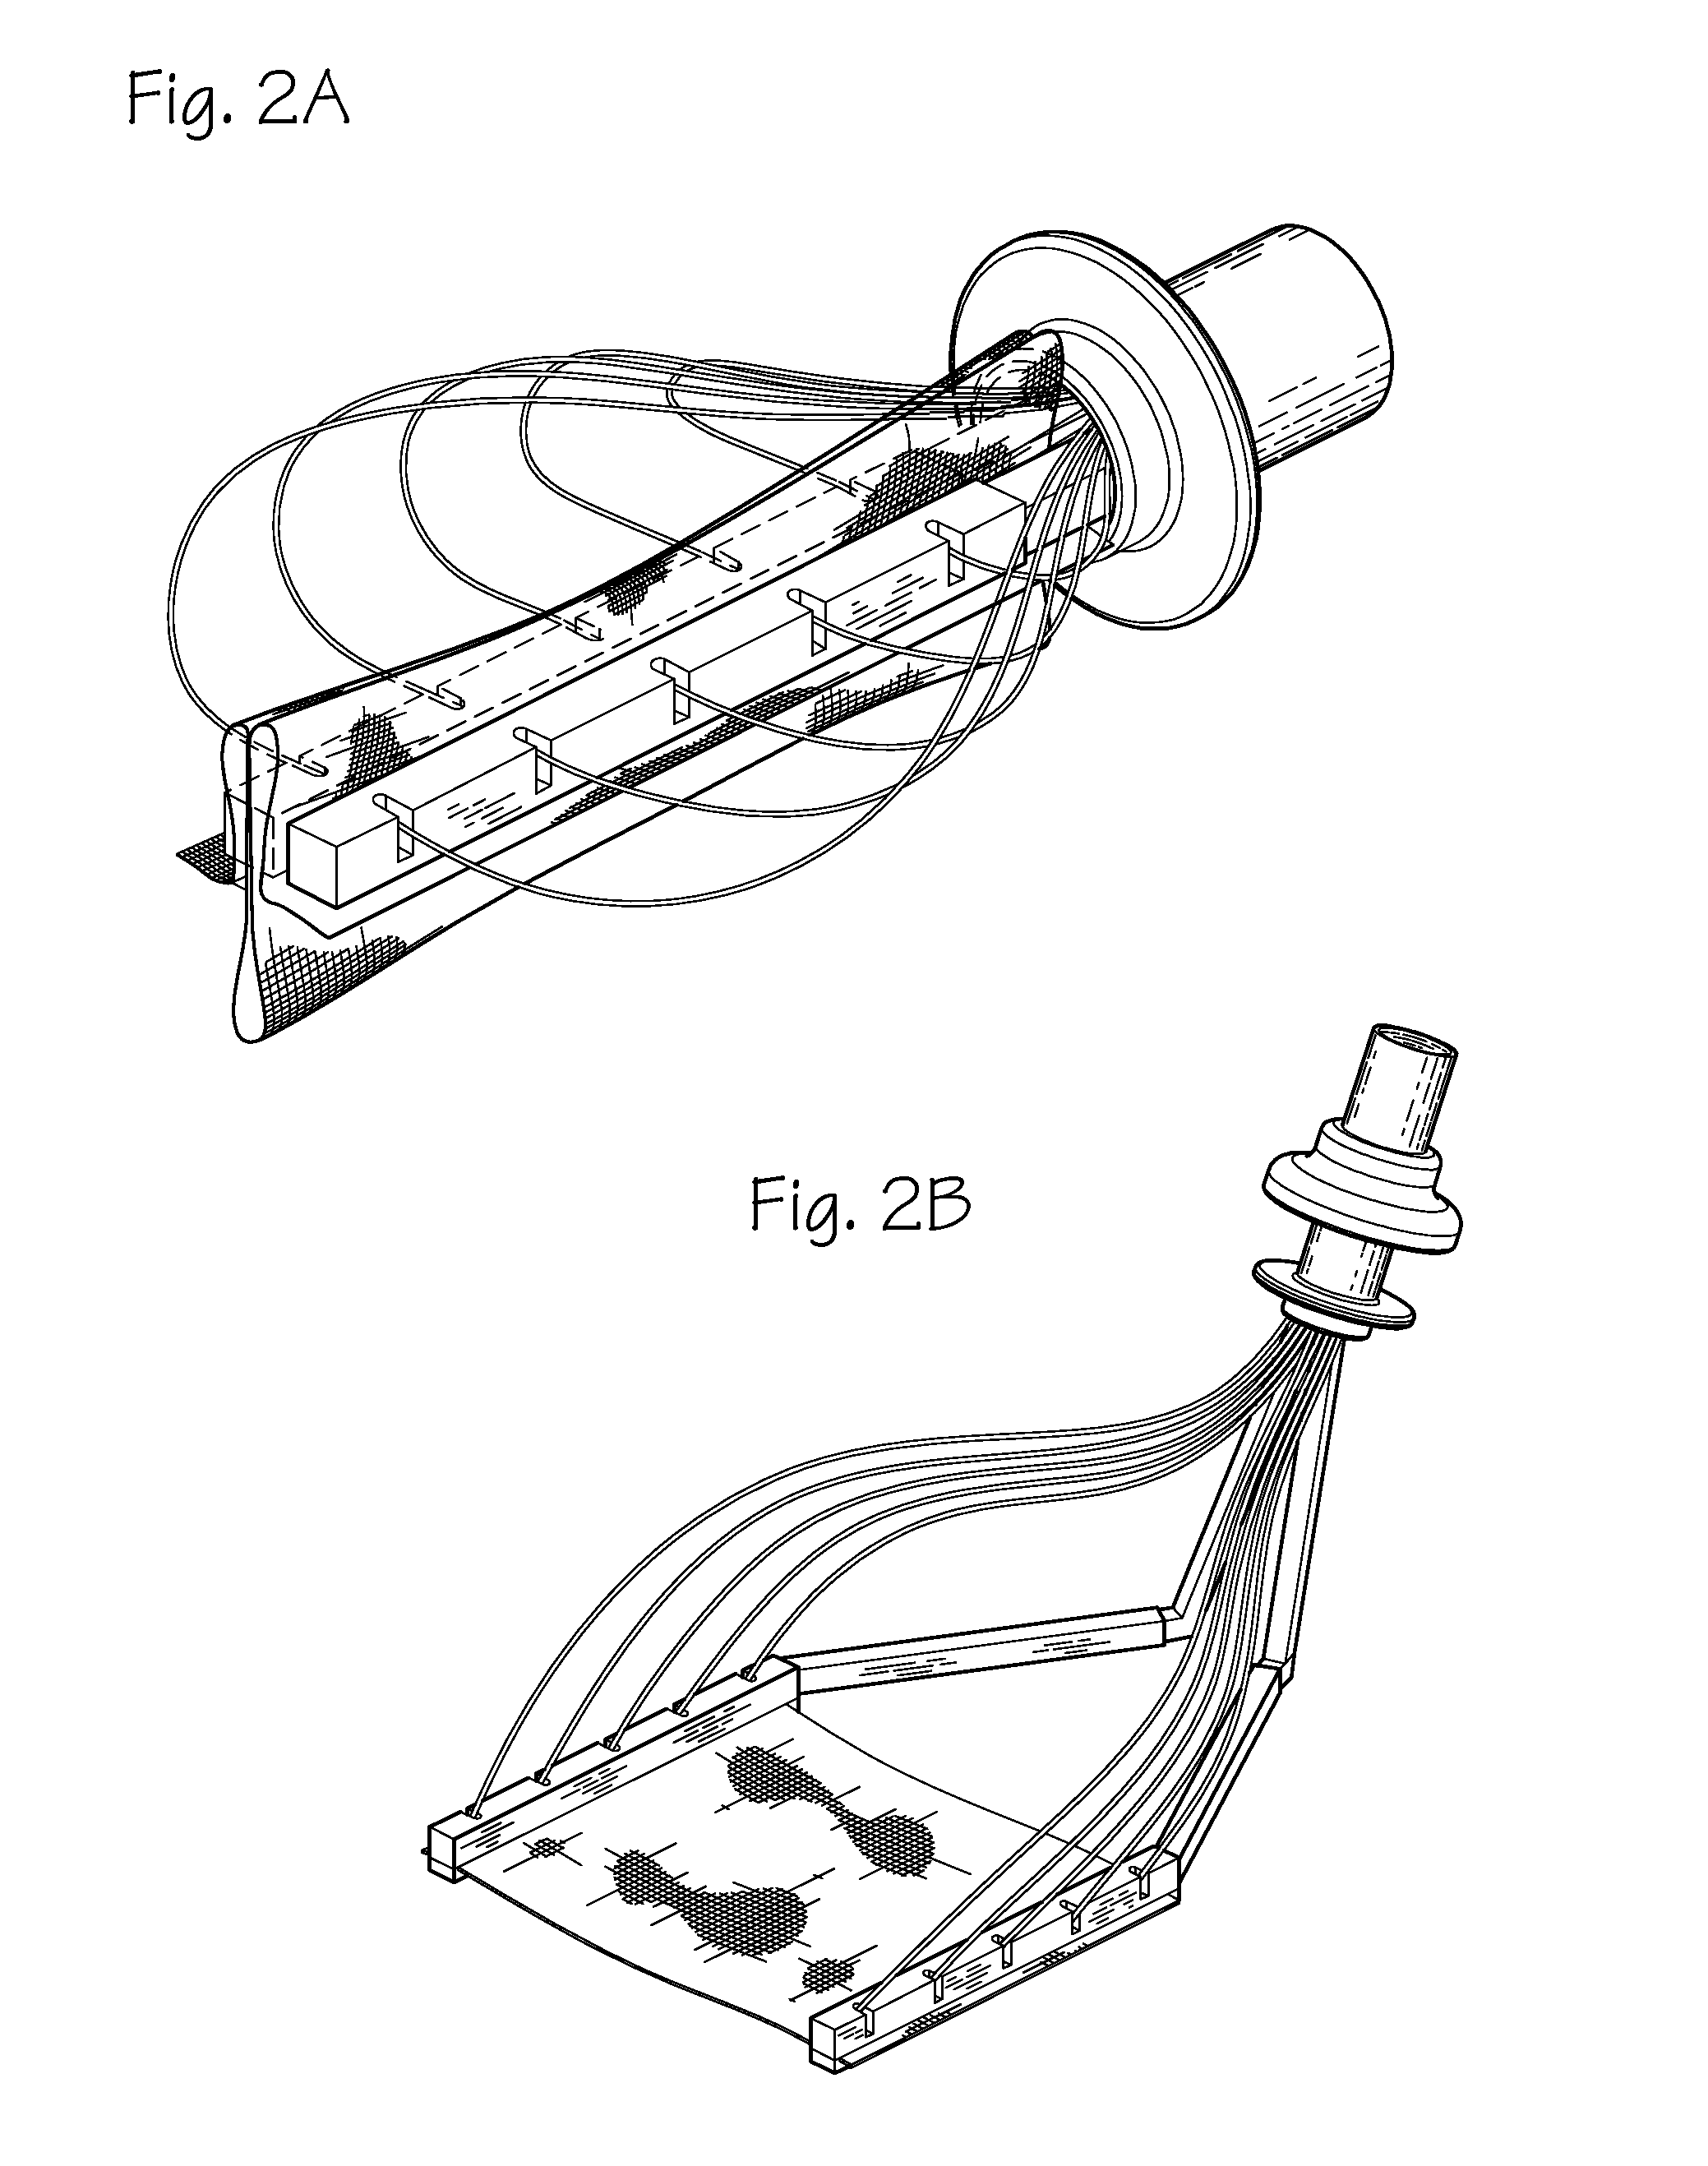 Method and devices for implantation of biologic constructs